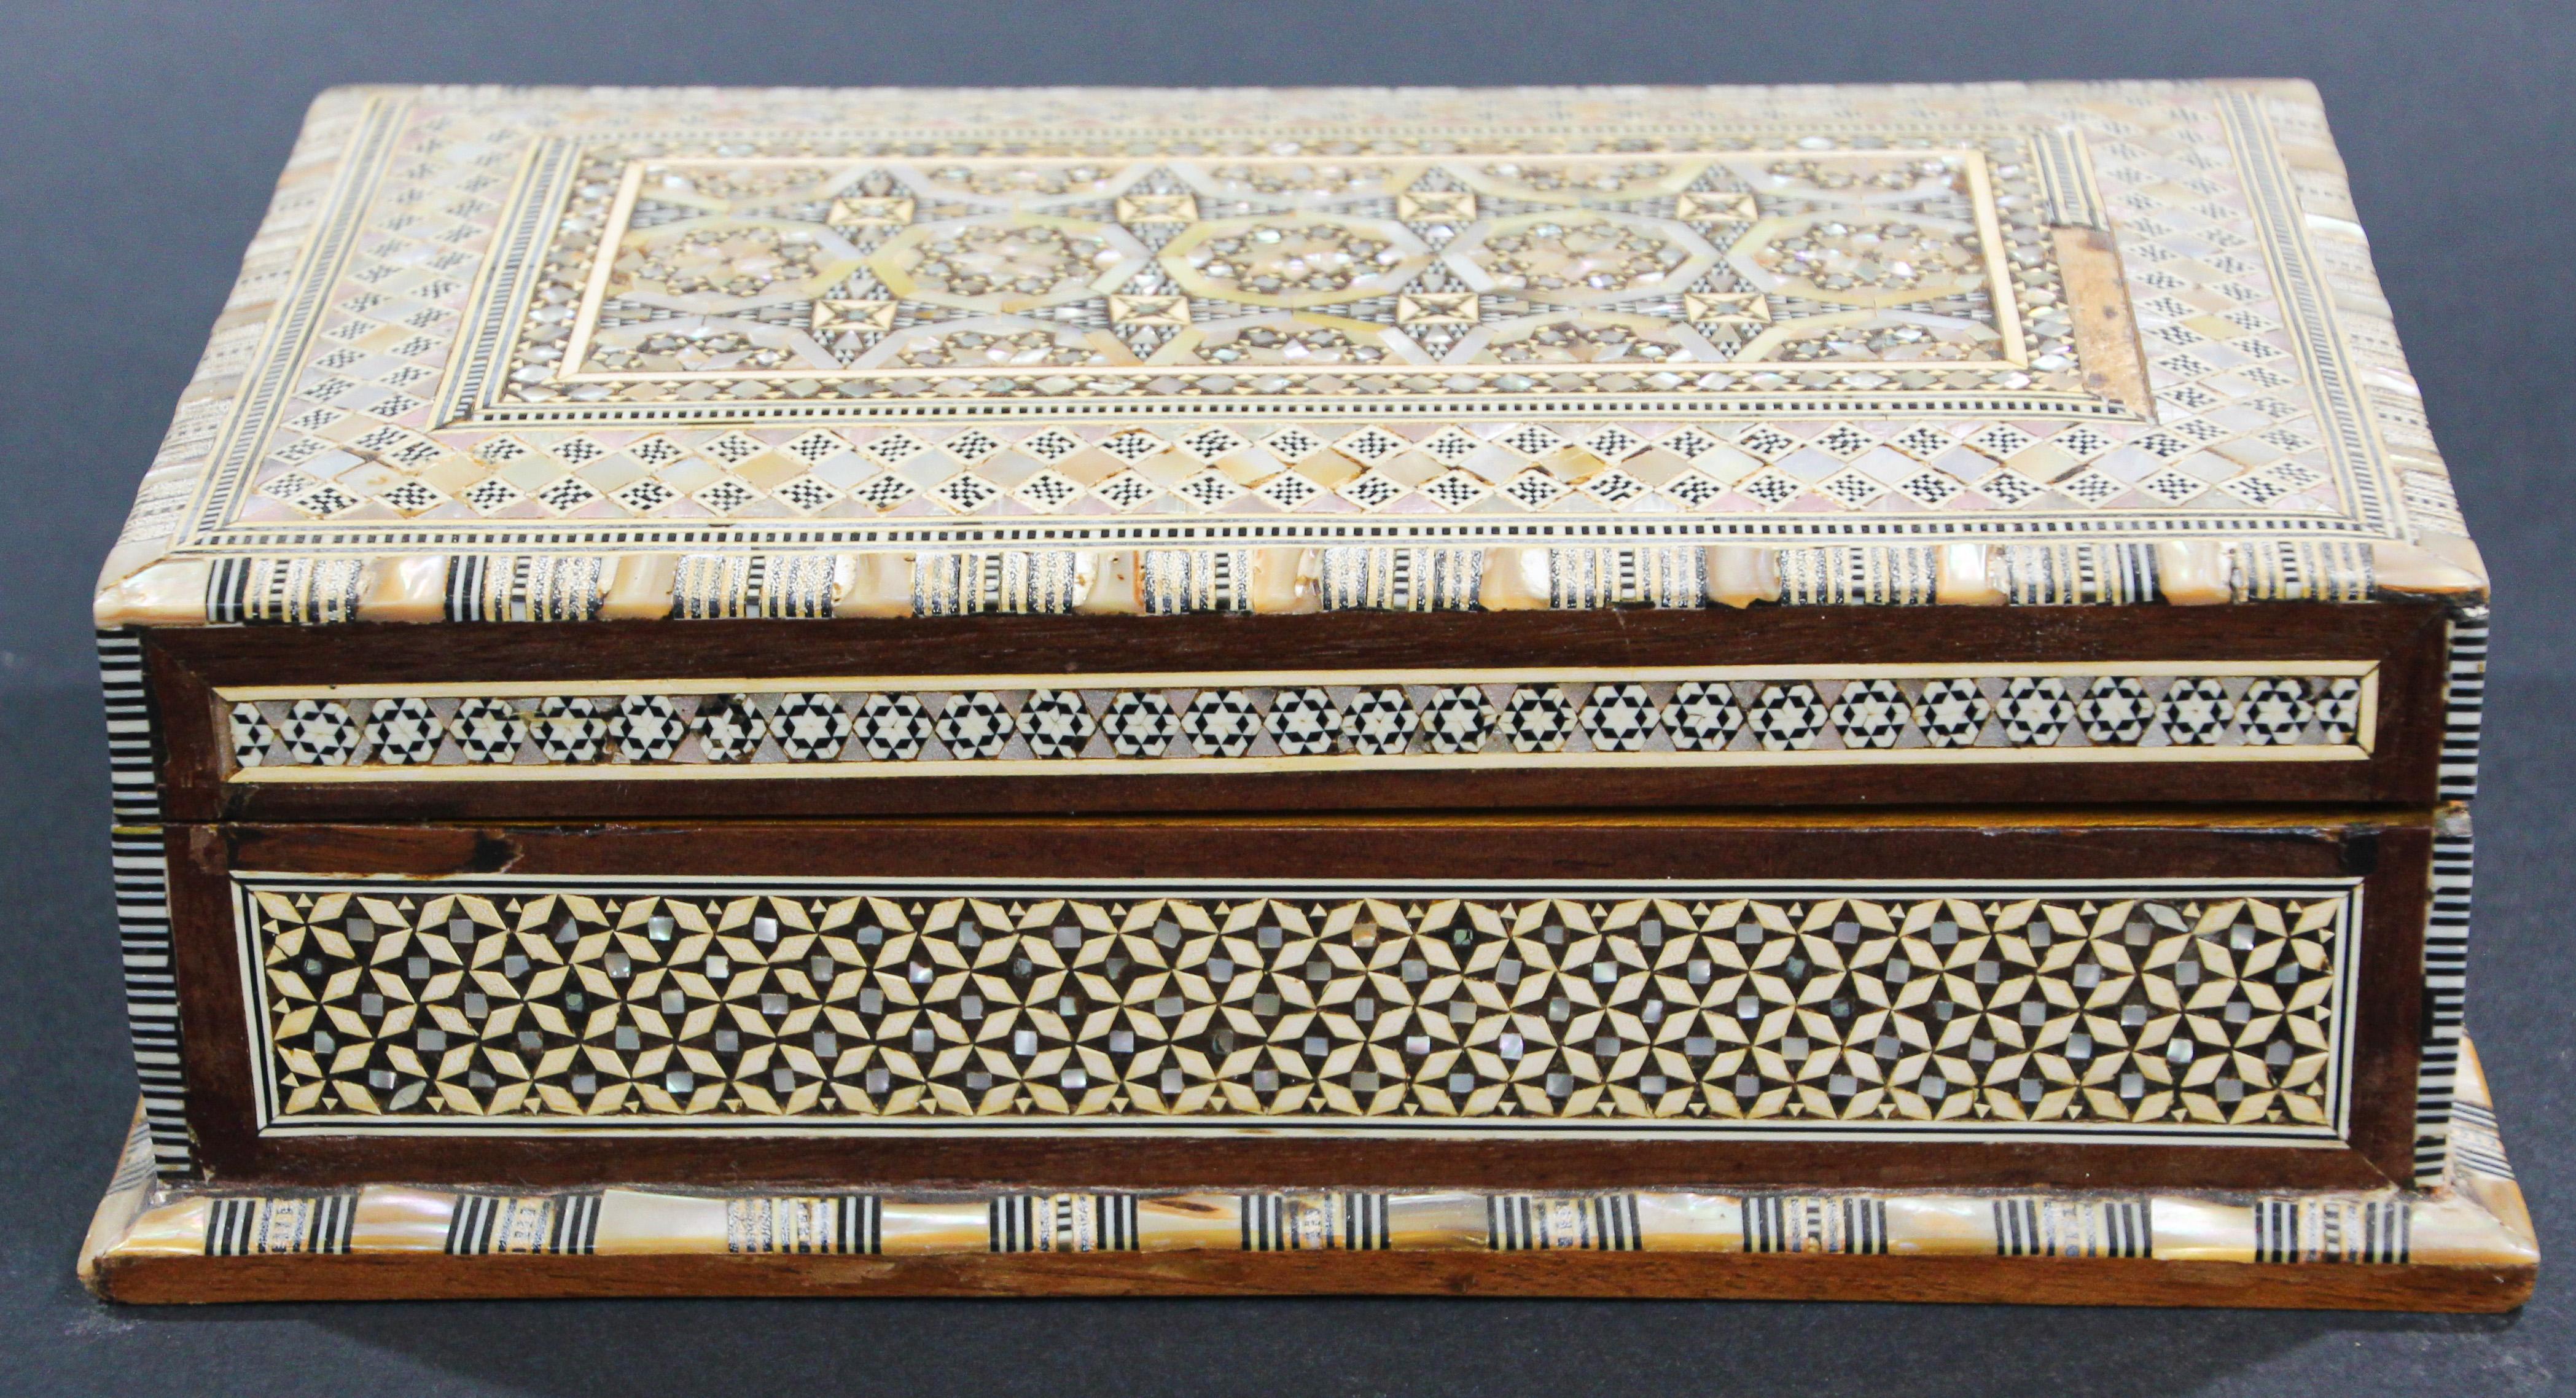 Exquisite handcrafted Middle Eastern mosaic marquetry inlaid walnut wood Jewelry box.
Large box intricately decorated with Moorish motif designs which have been painstakingly inlaid with mosaic marquetry, mother of pearl and fruitwoods.
Middle